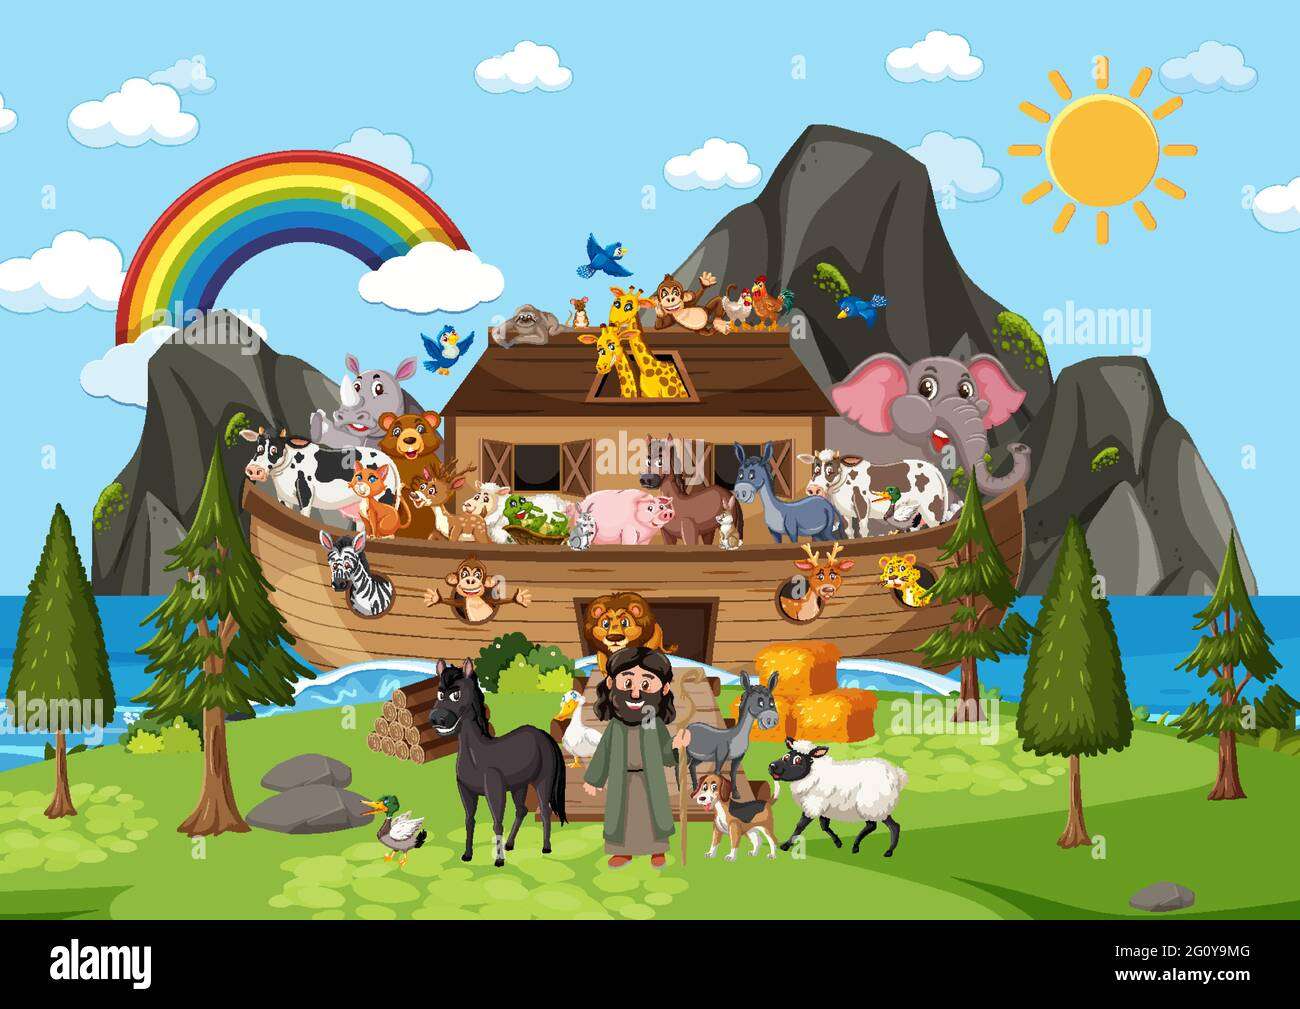 Noah's ark puzzle online from photo